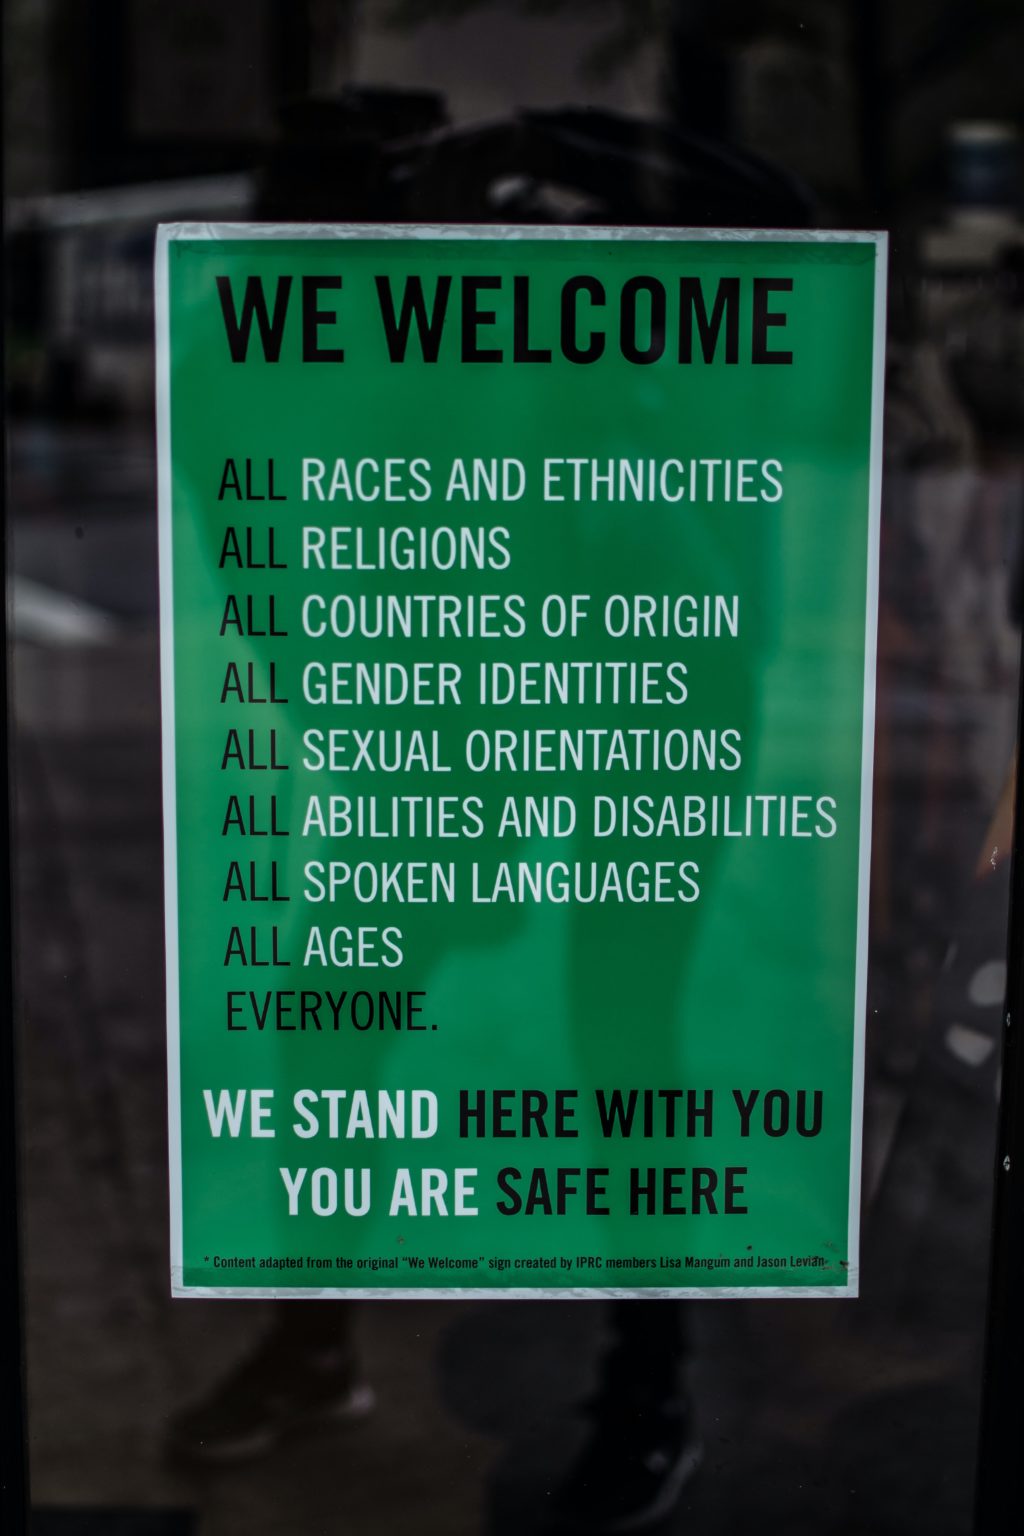 Green sign on a window reads "We welcome all races and ethnicities, all religions, all countries of origin, all gender identities, all sexual orientations, all abilities and disabilities, all spoken languages, all ages, everyone. We stand her with you. You are safe here."